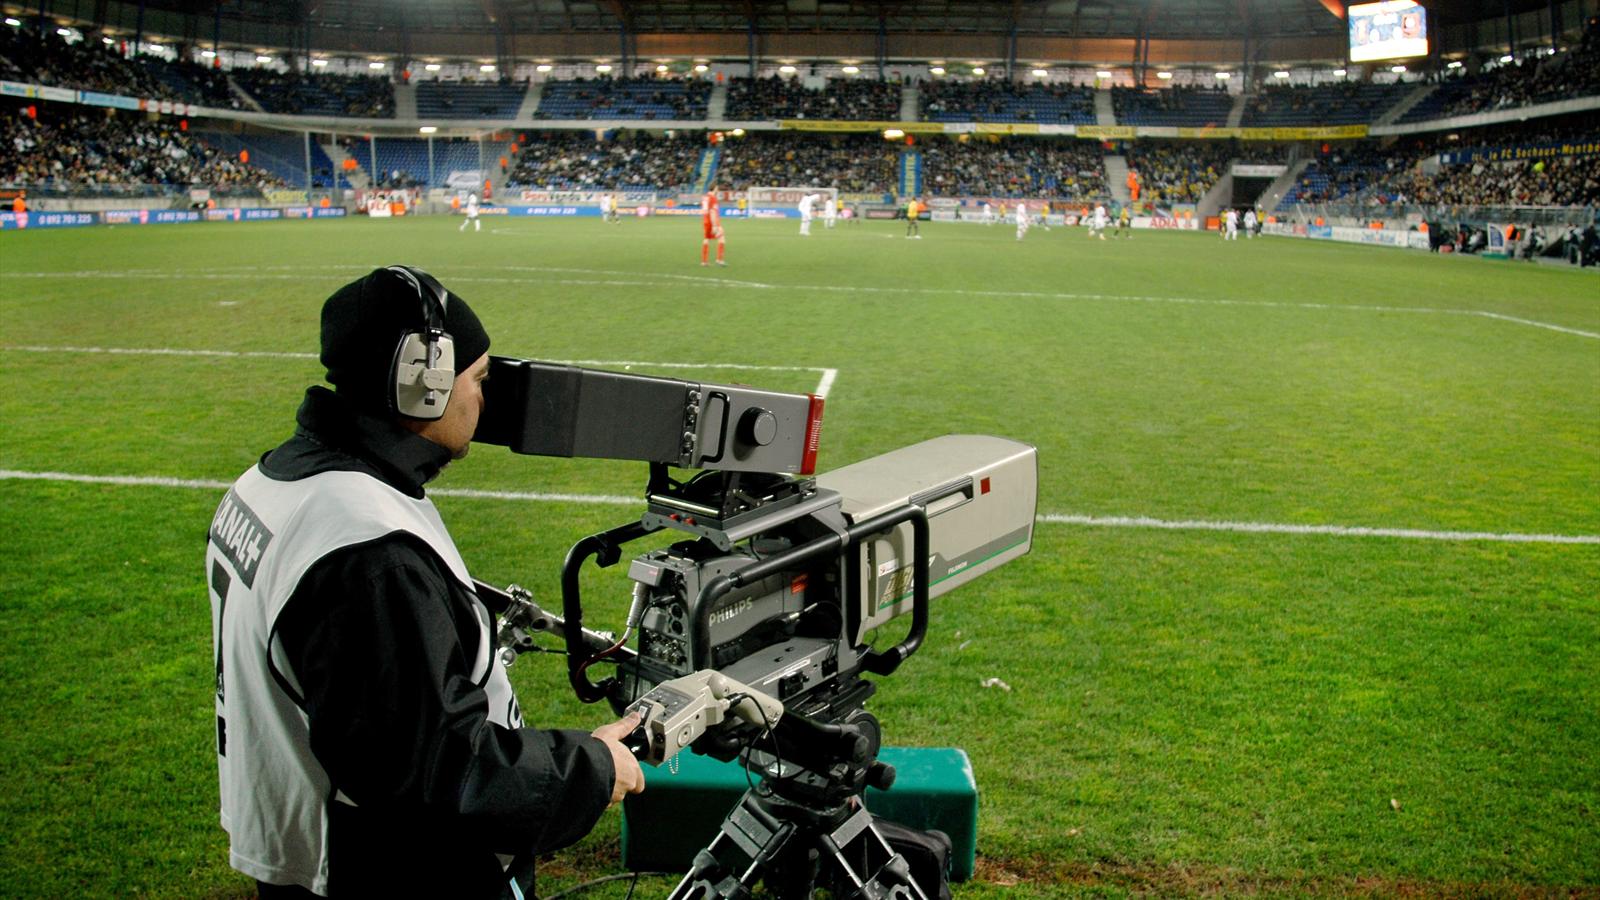 Television rights for the Premier League were sold for £5.1 billion (HK$60 billion) earlier this year. Photo: AFP